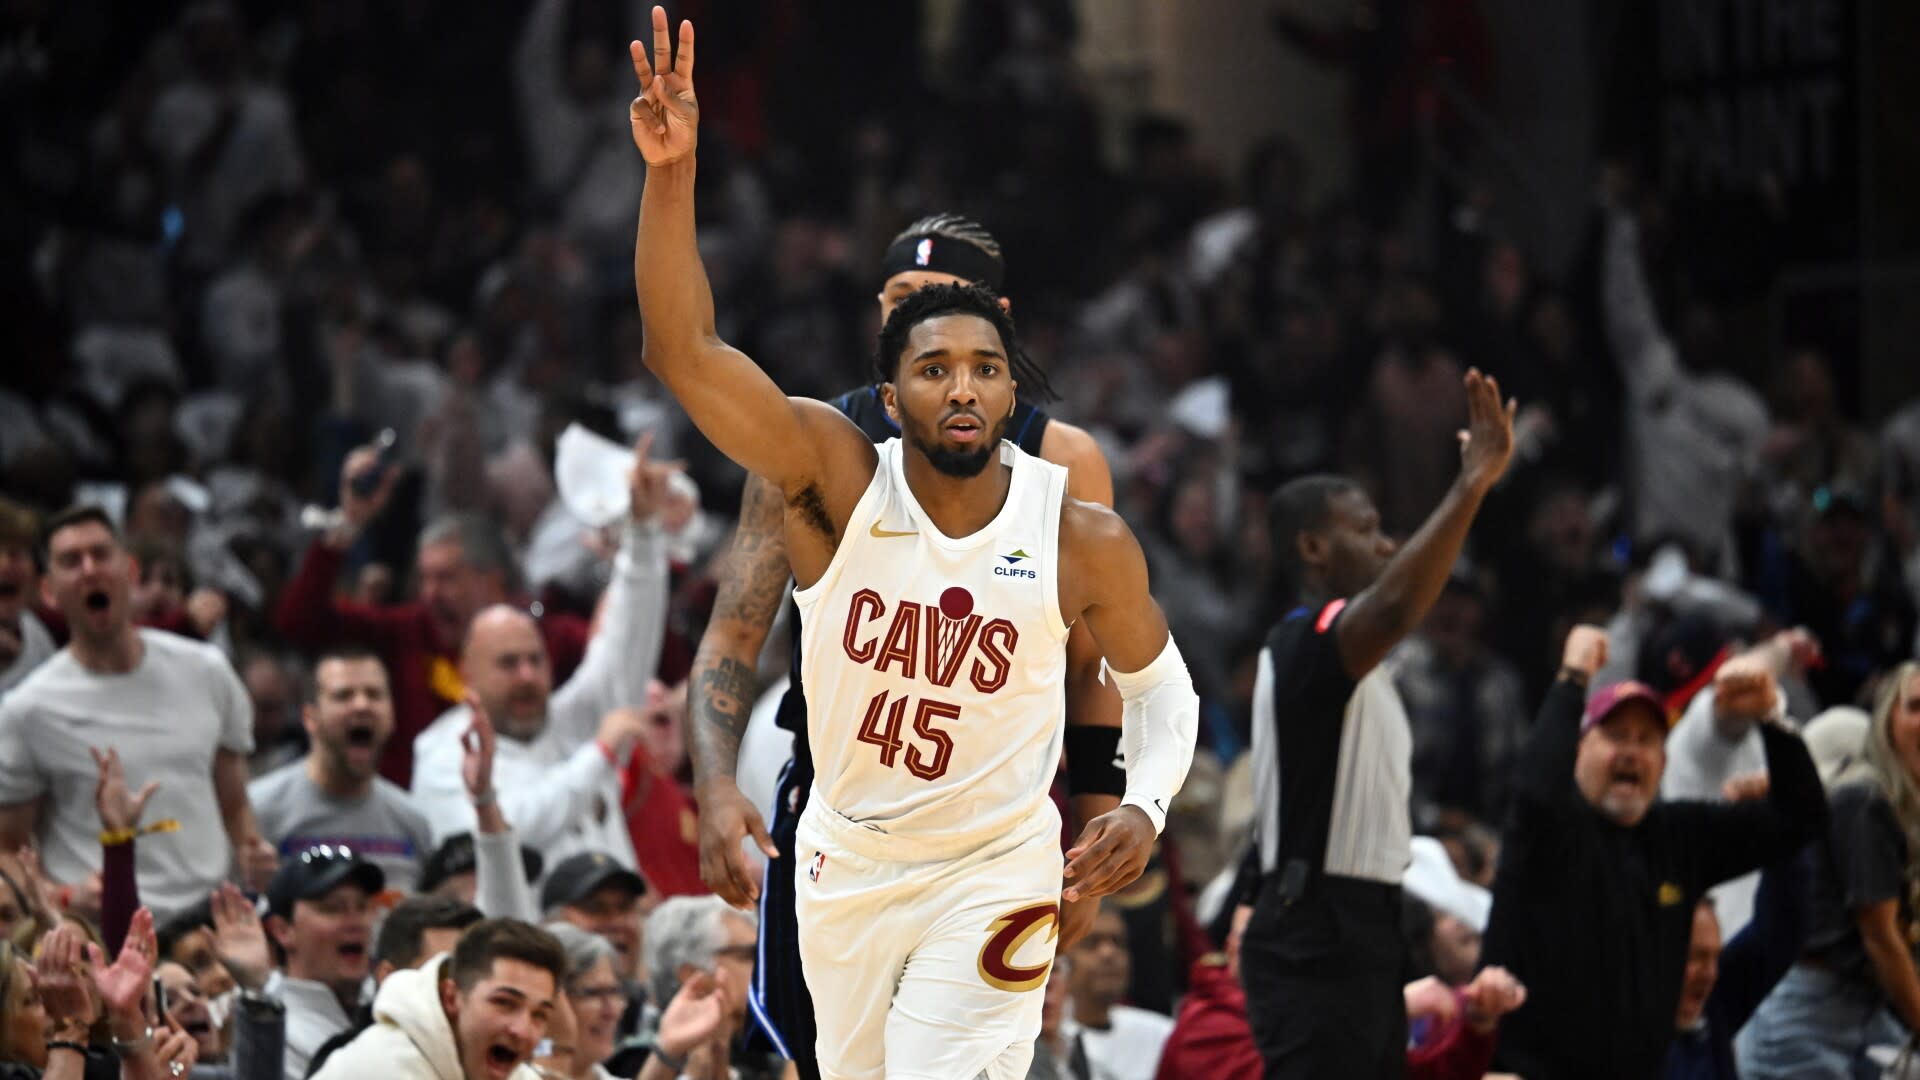 Donovan Mitchell scores 23, Cavaliers power to 96-86 win to take commanding 2-0 lead over Magic